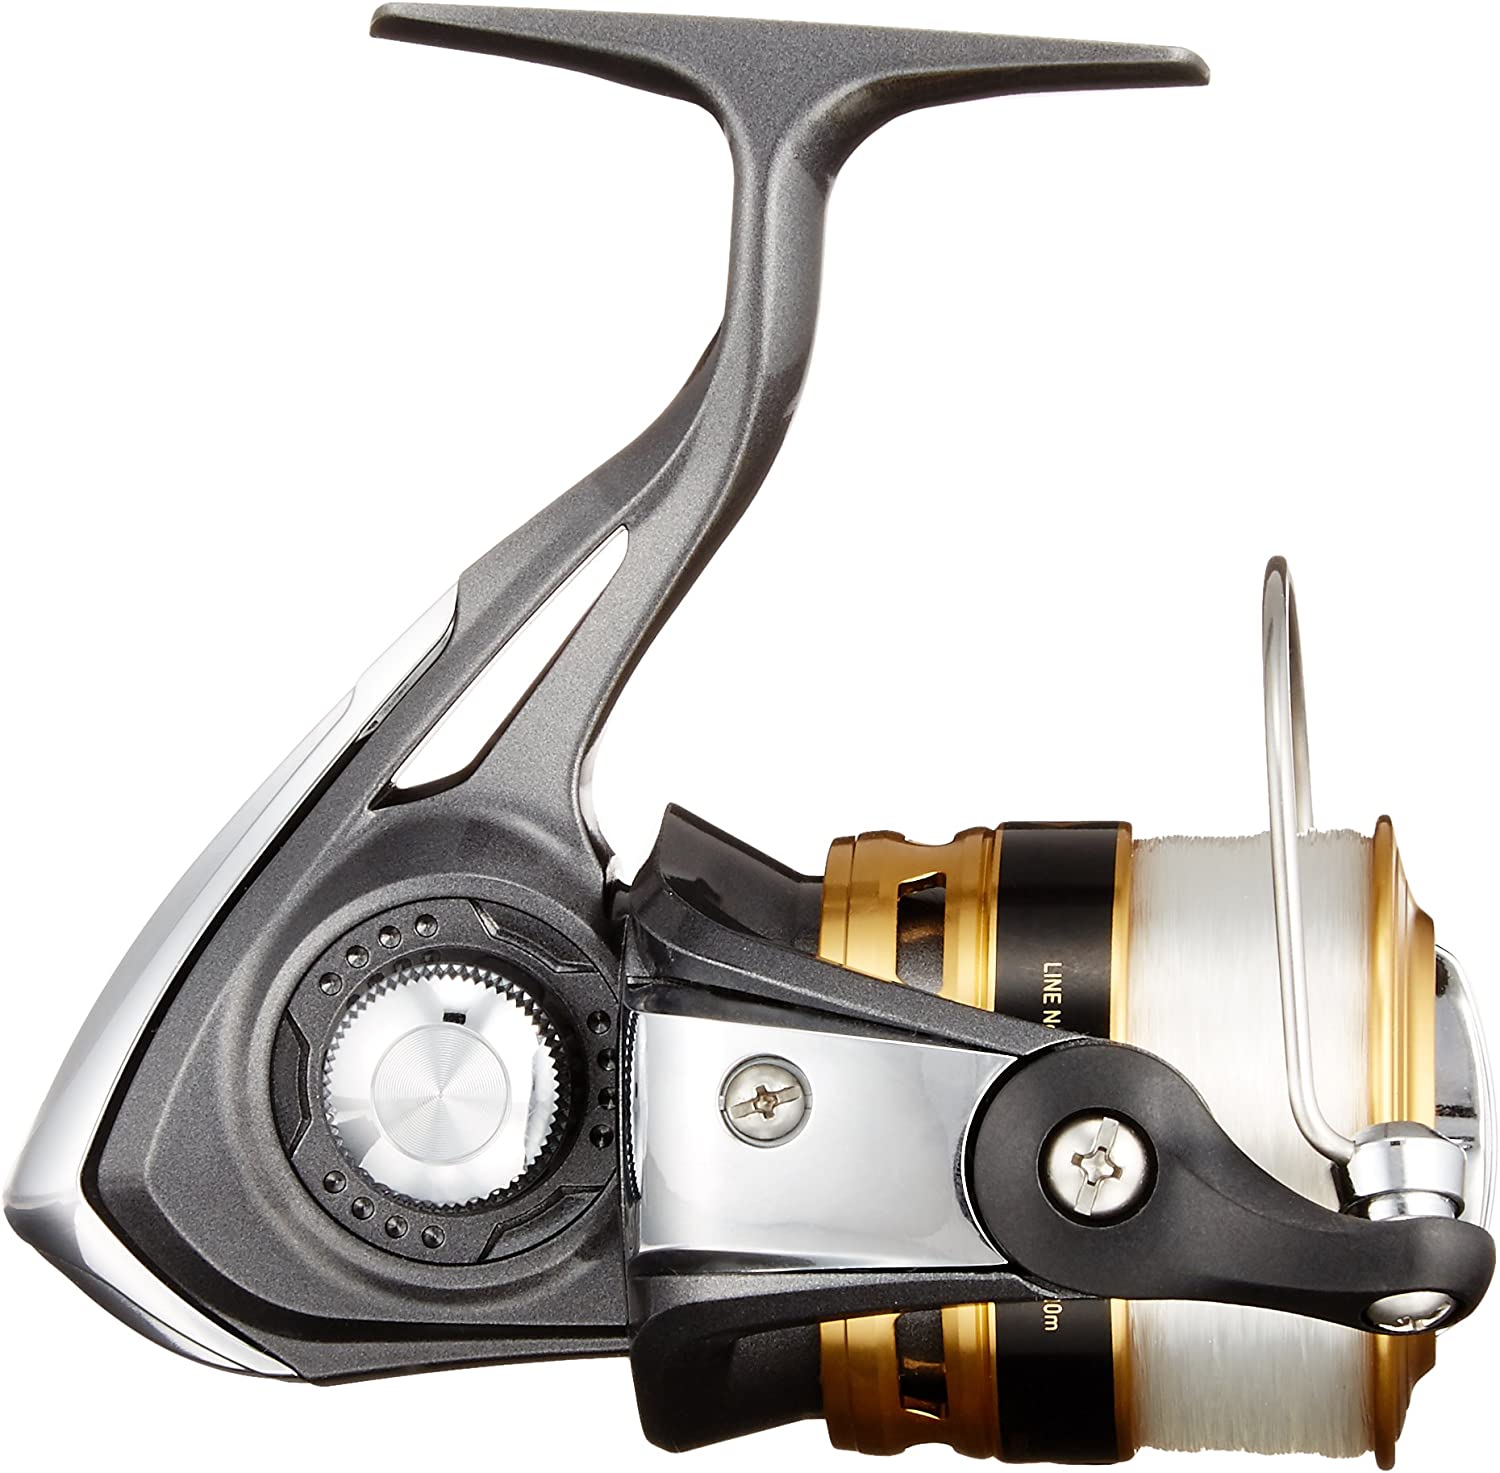 Daiwa spinning reel (with thread) 16 Joinus (2016 model) - Discovery Japan  Mall